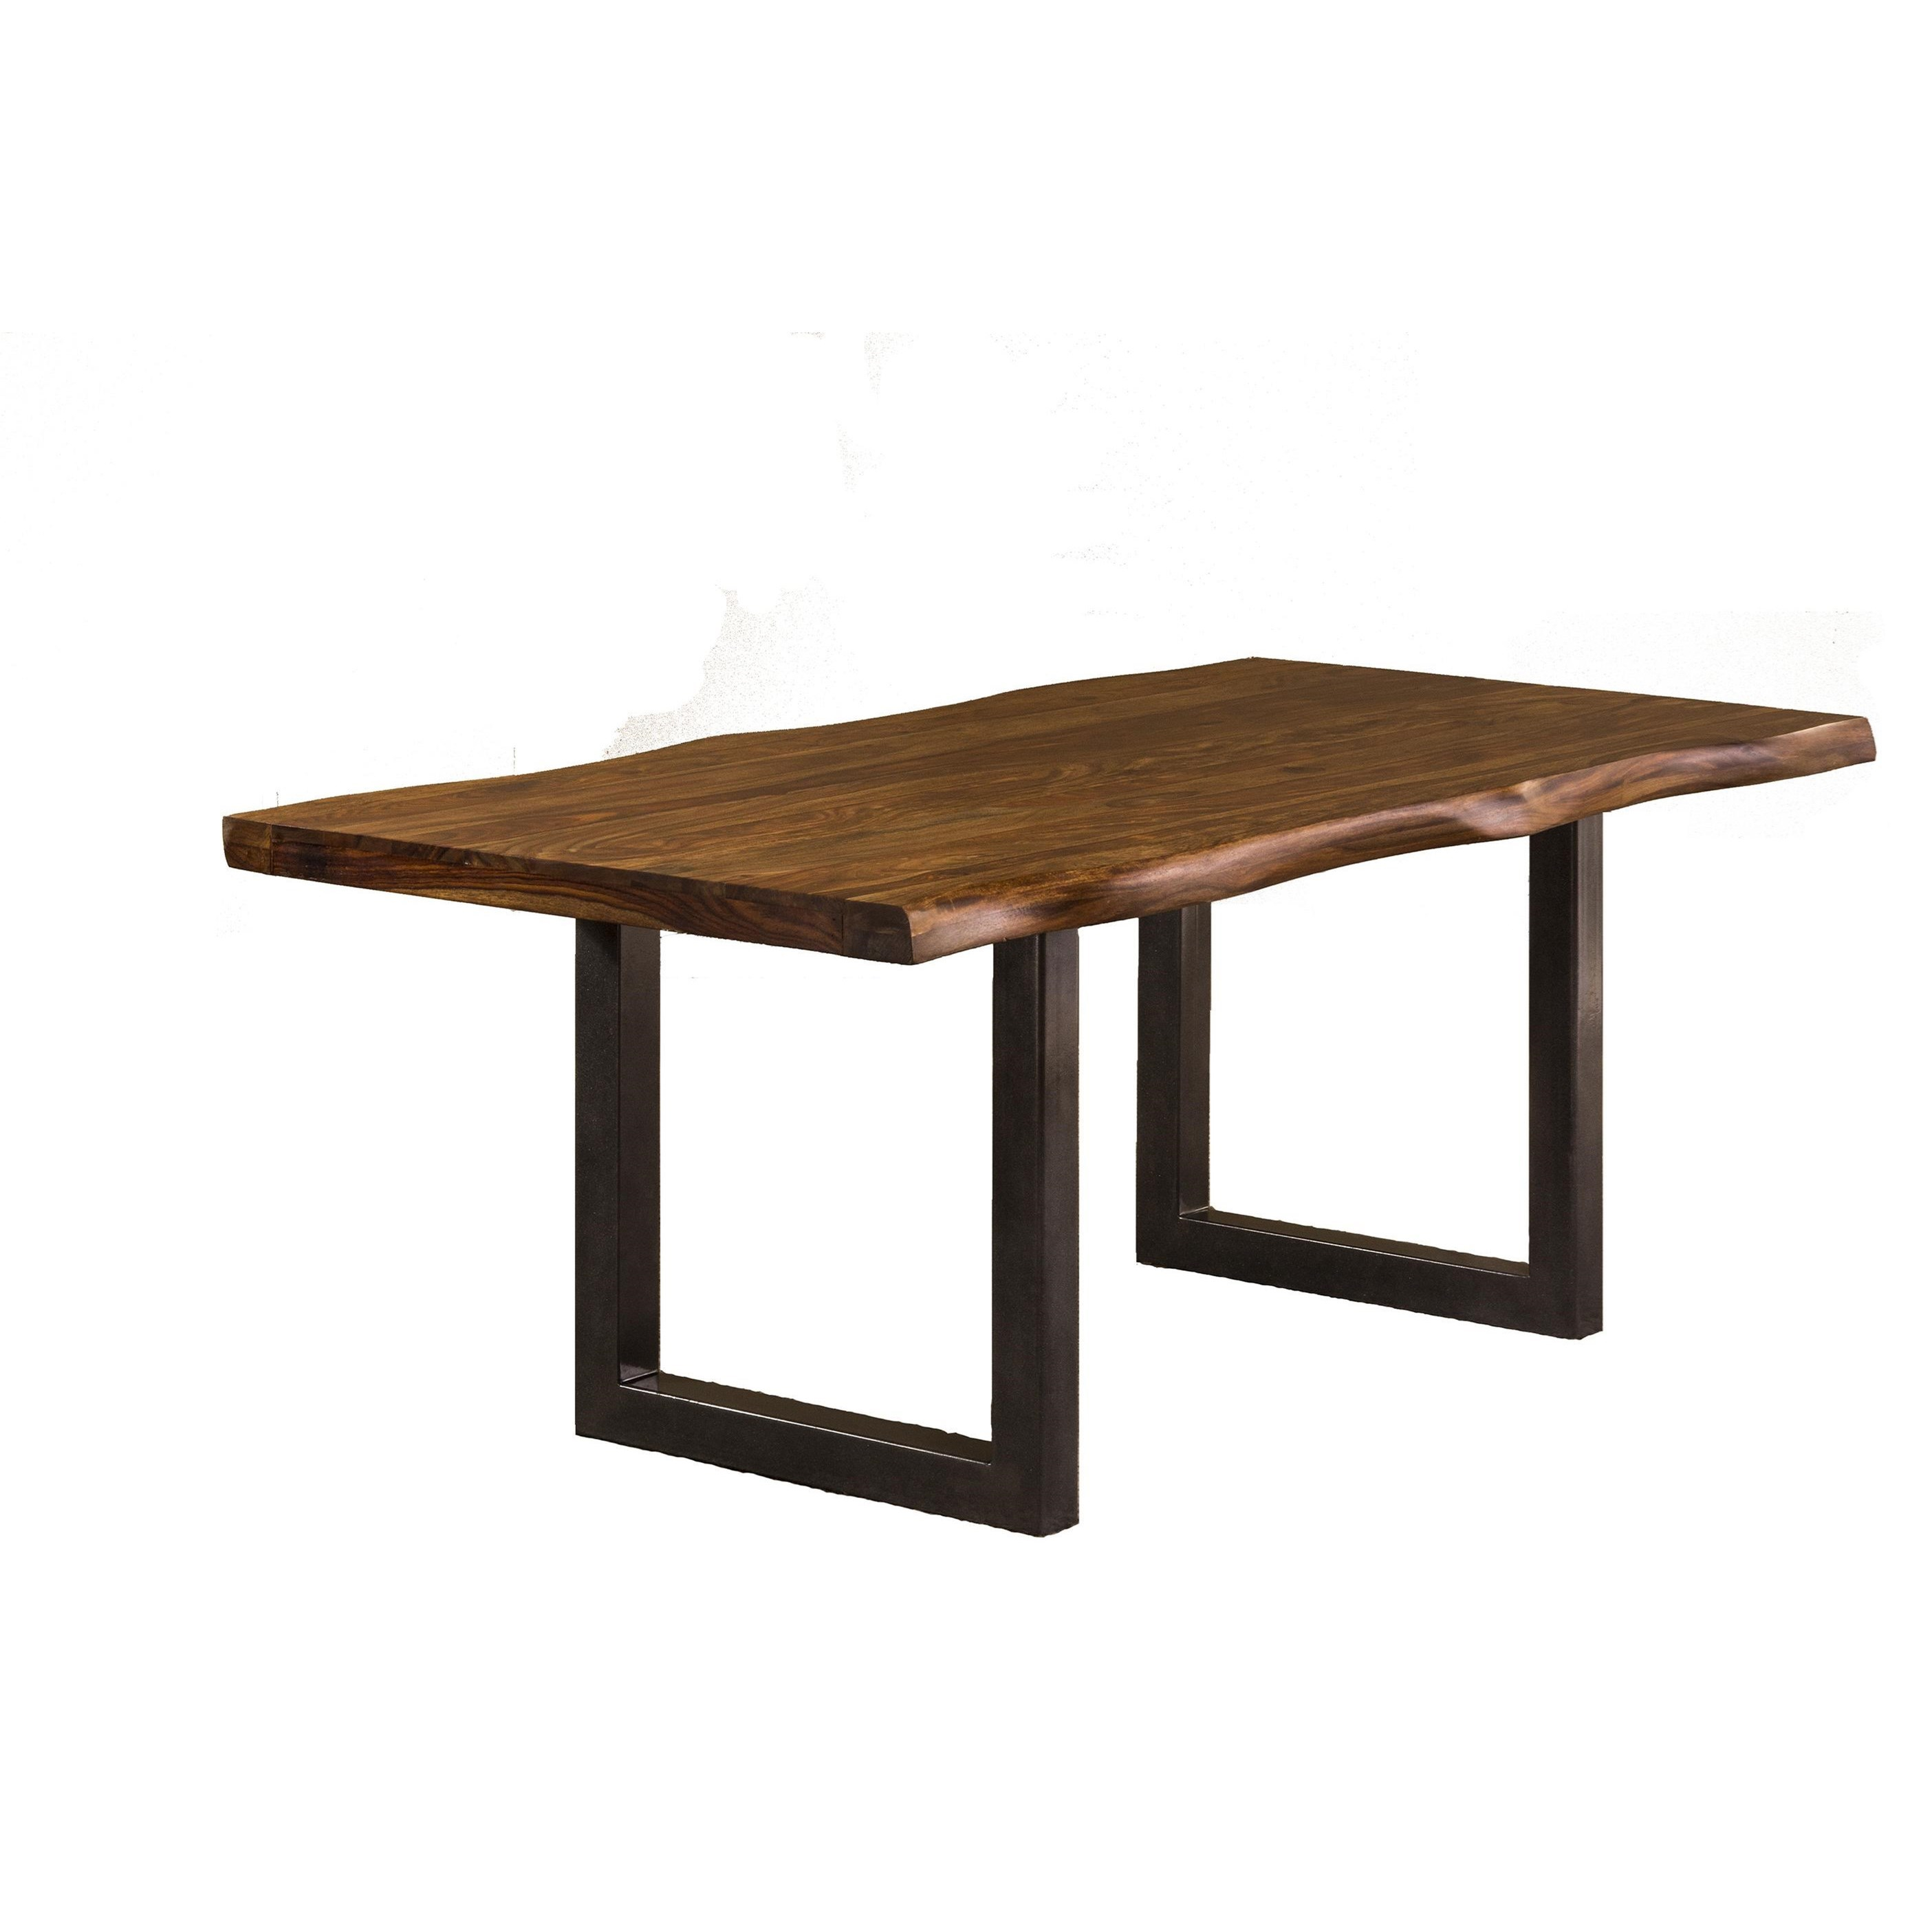 Hillsdale Emerson Natural Sheesham Wood Rectangular Dining Table inside proportions 2809 X 2809